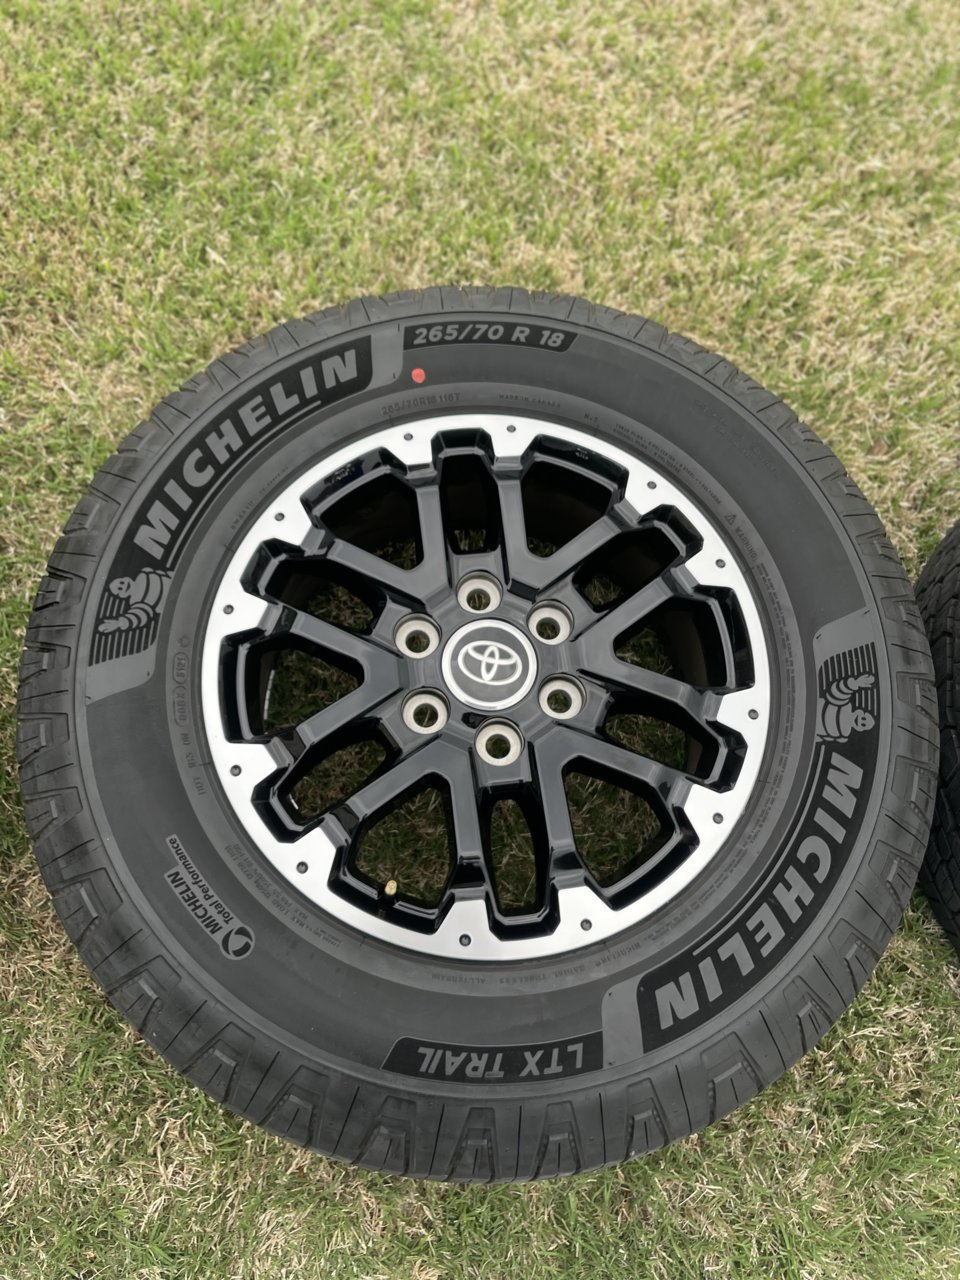 *SOLD*Like new TRD Off Road OEM Wheels & Tires | Toyota Tundra Forum